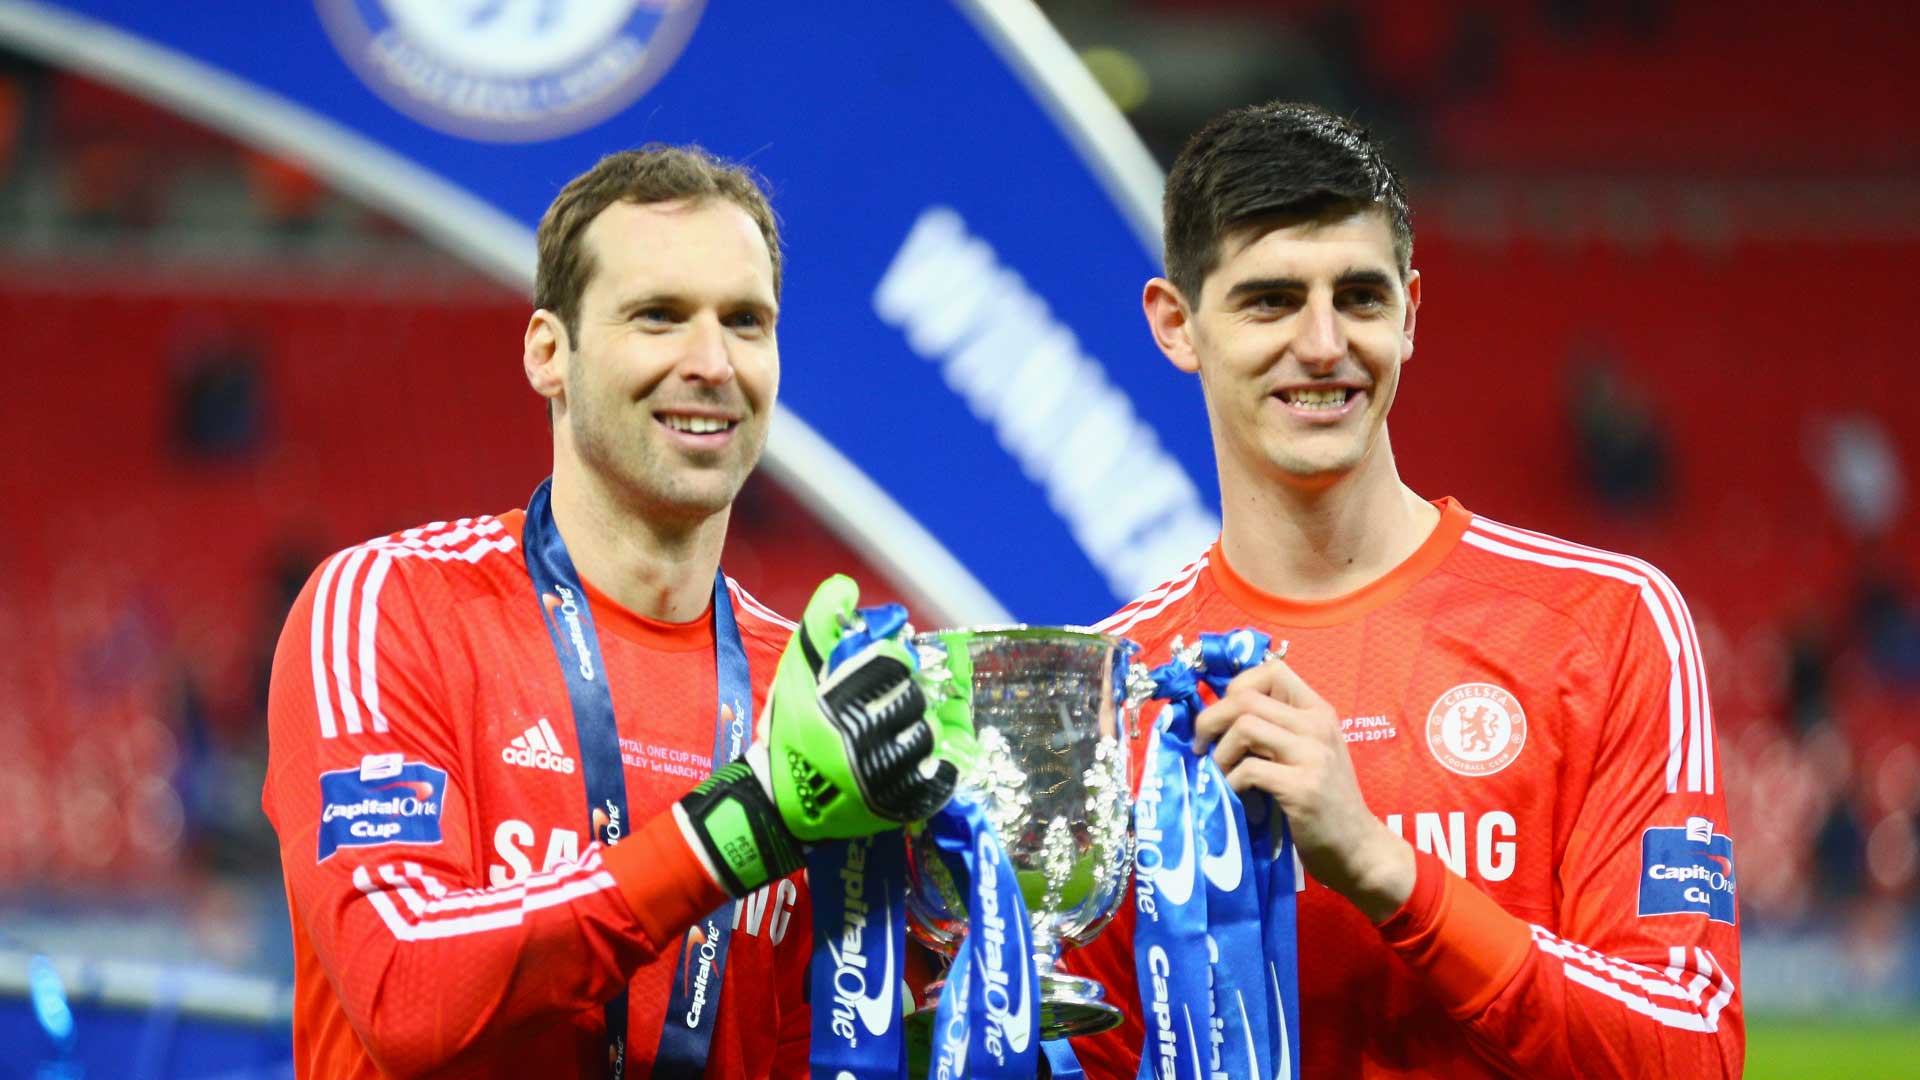 ‘I wasn’t happy that Courtois was made No.1’ – Cech reflects on Chelsea edging him towards Arsenal